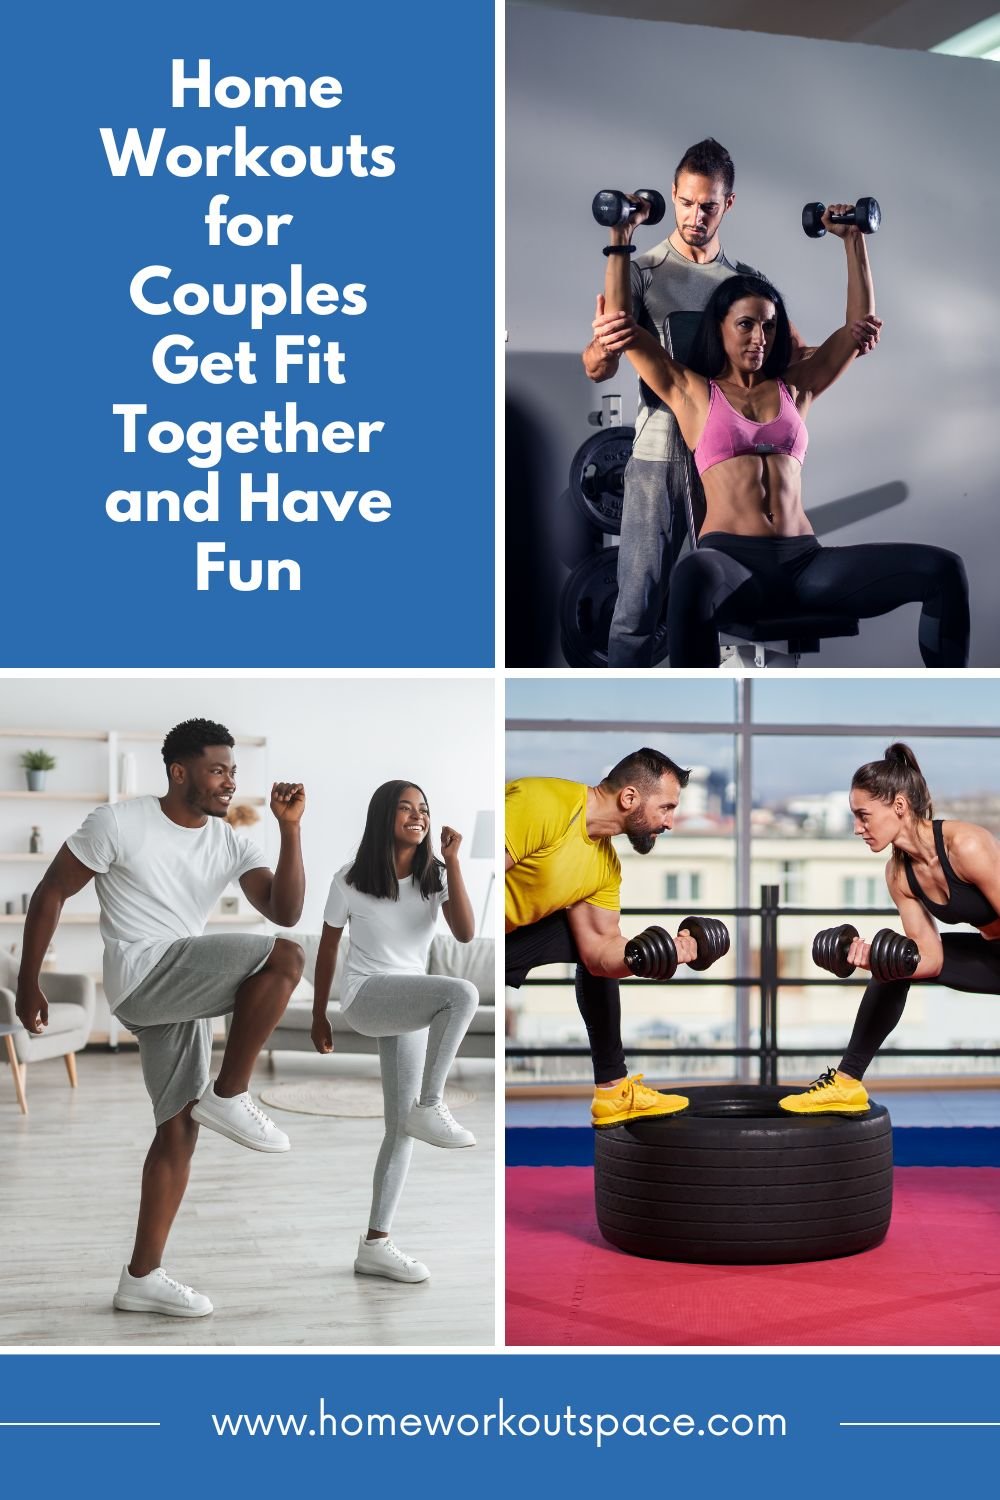 Home Workouts for Couples